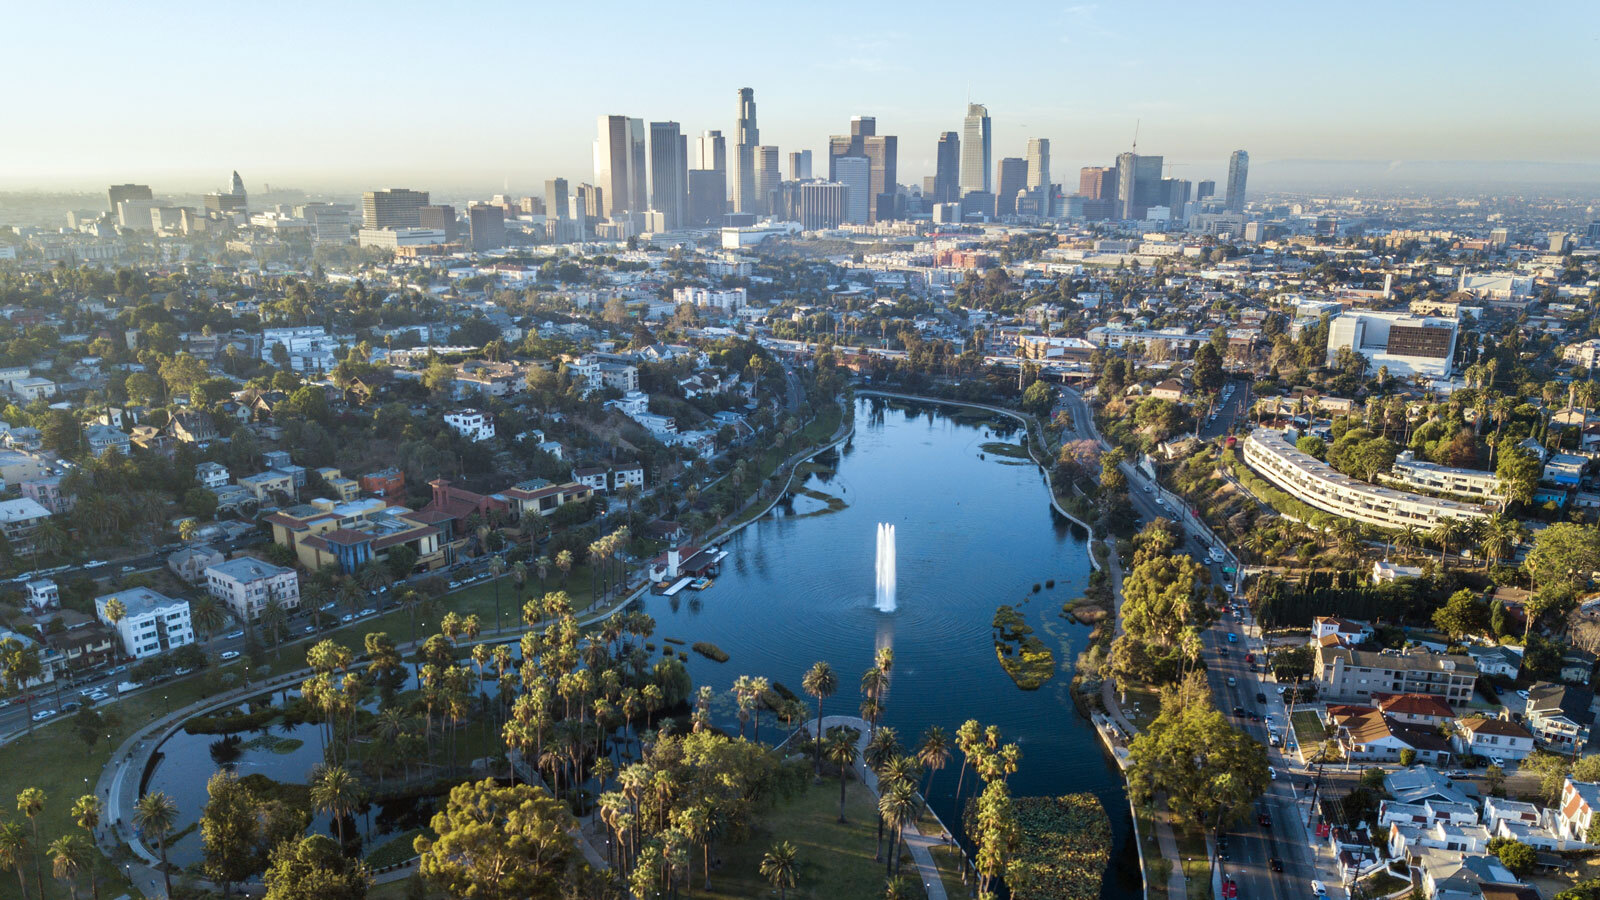 Echo Park Lake with Downtown Los Angeles skyline in the background